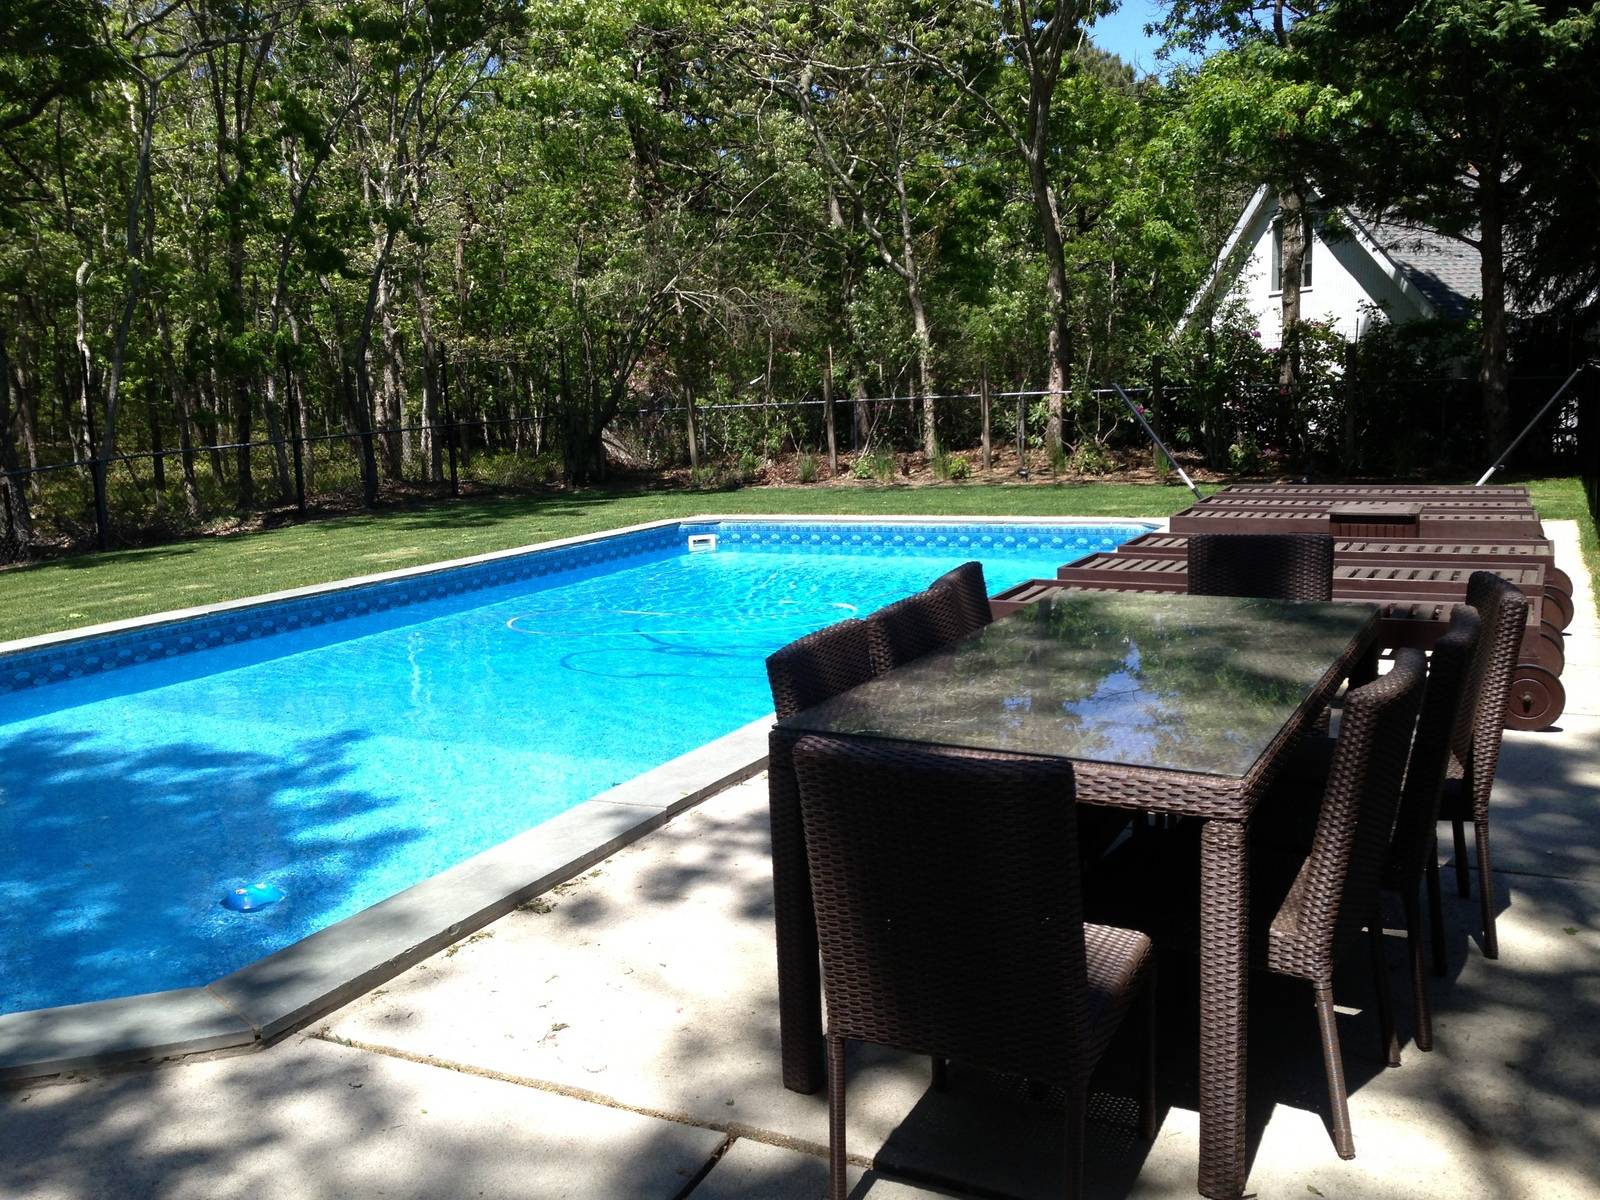 EAST HAMPTON - RELAX POOL SIDE AND ENJOY THE CLOSE VILLAGES!